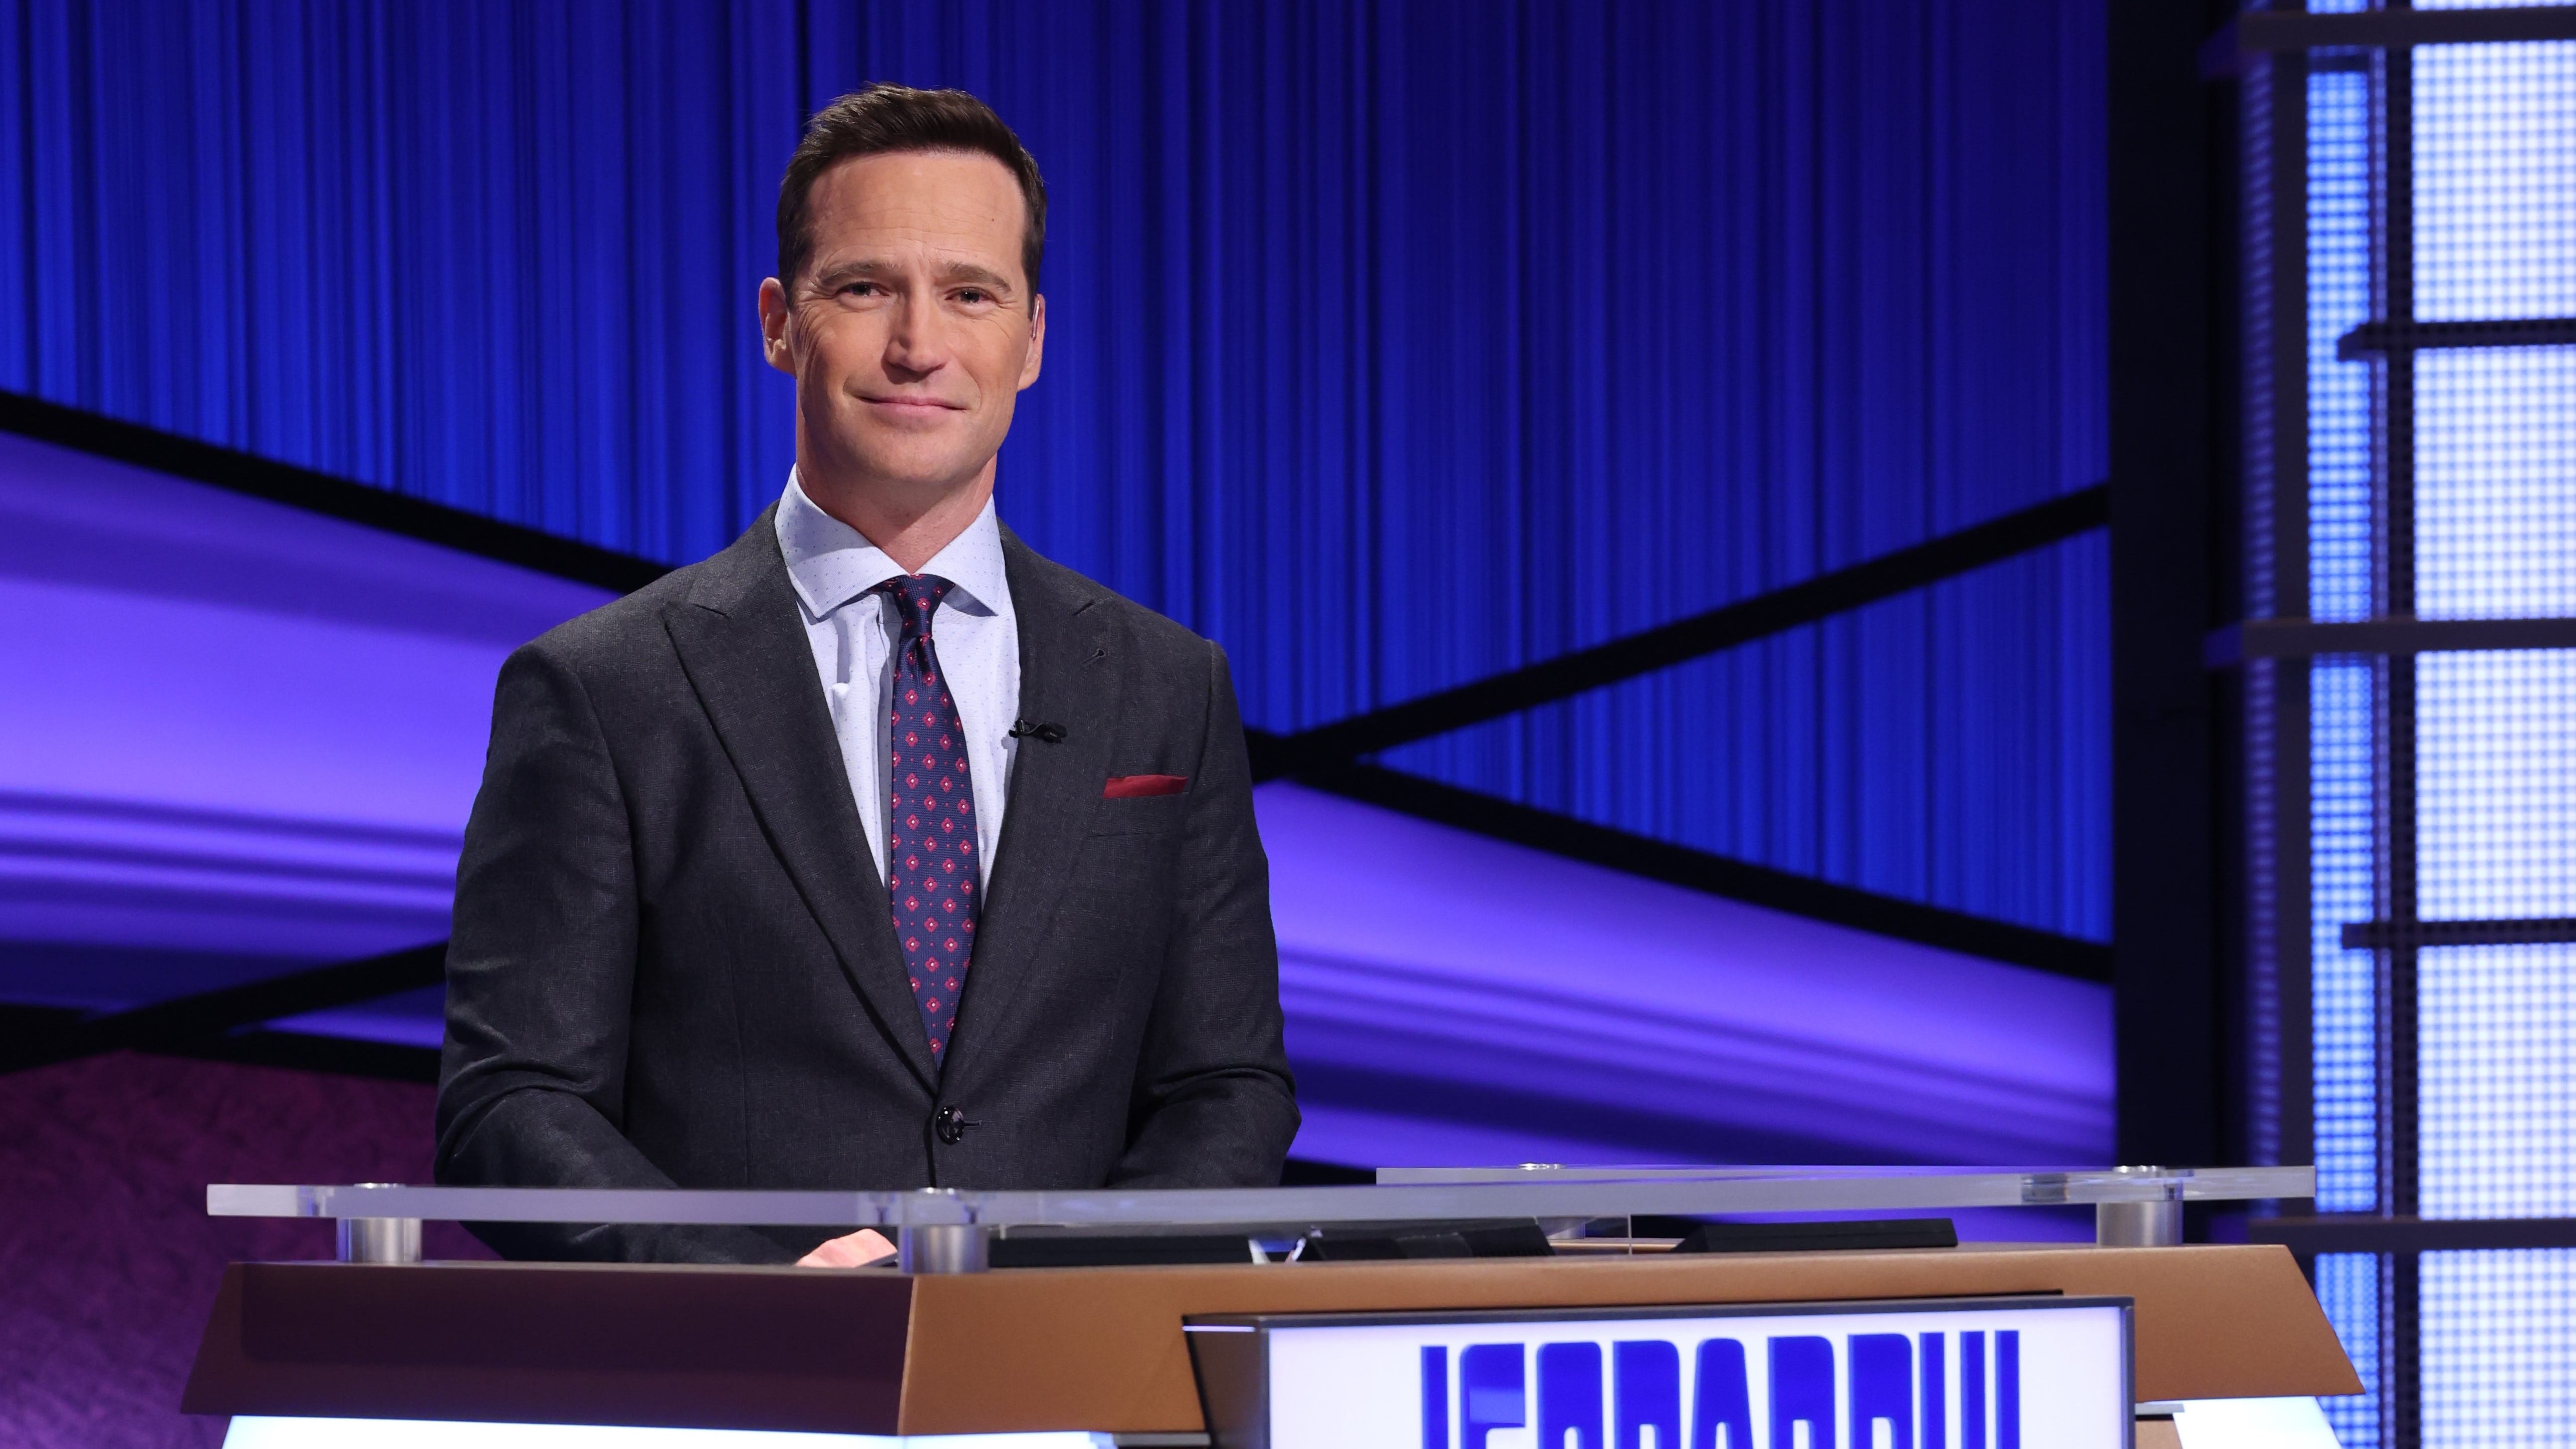 Mike Richards was selected as the permanent syndicated host of "Jeopardy!," but stepped down after controversy.